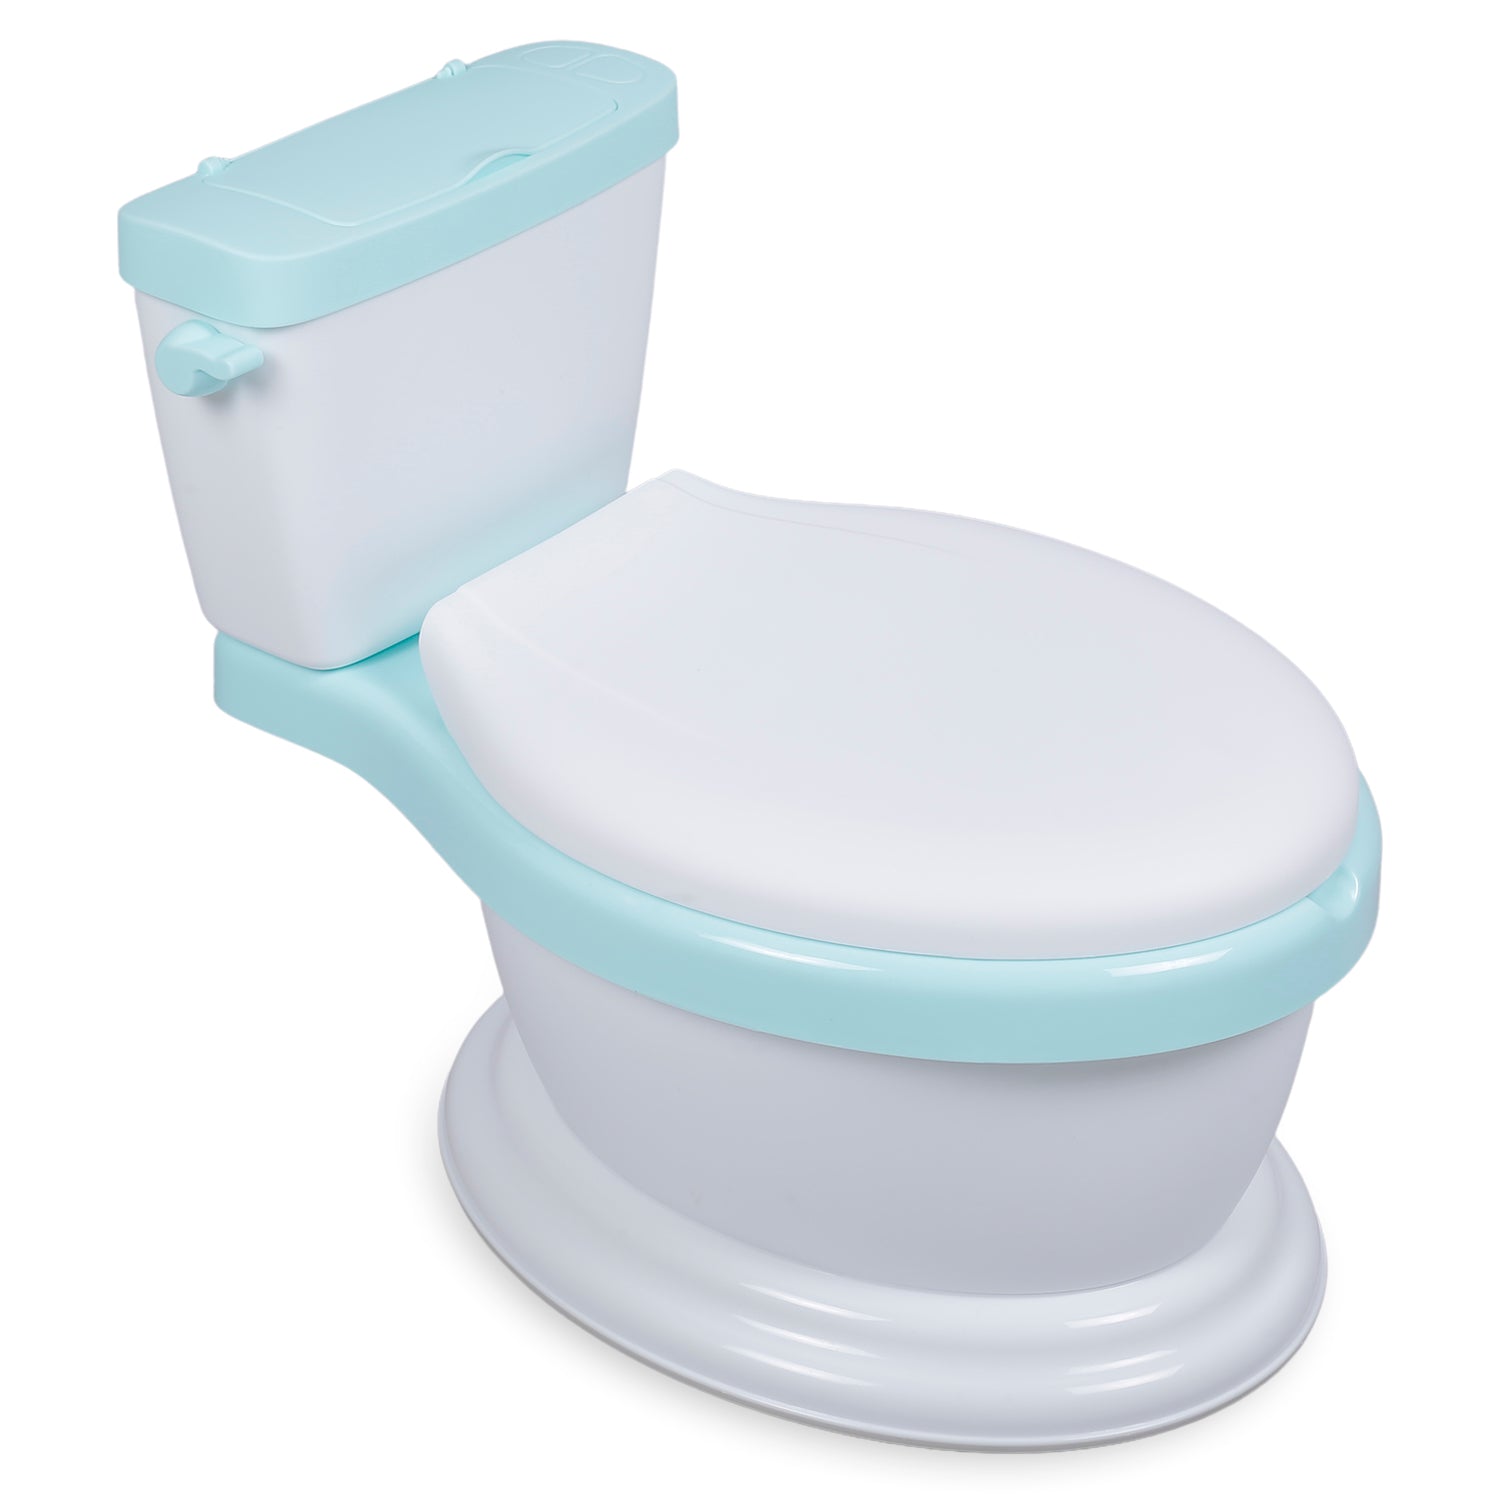 Toilet Training Potty Chair Realistic Western Style Blue - Baby Moo